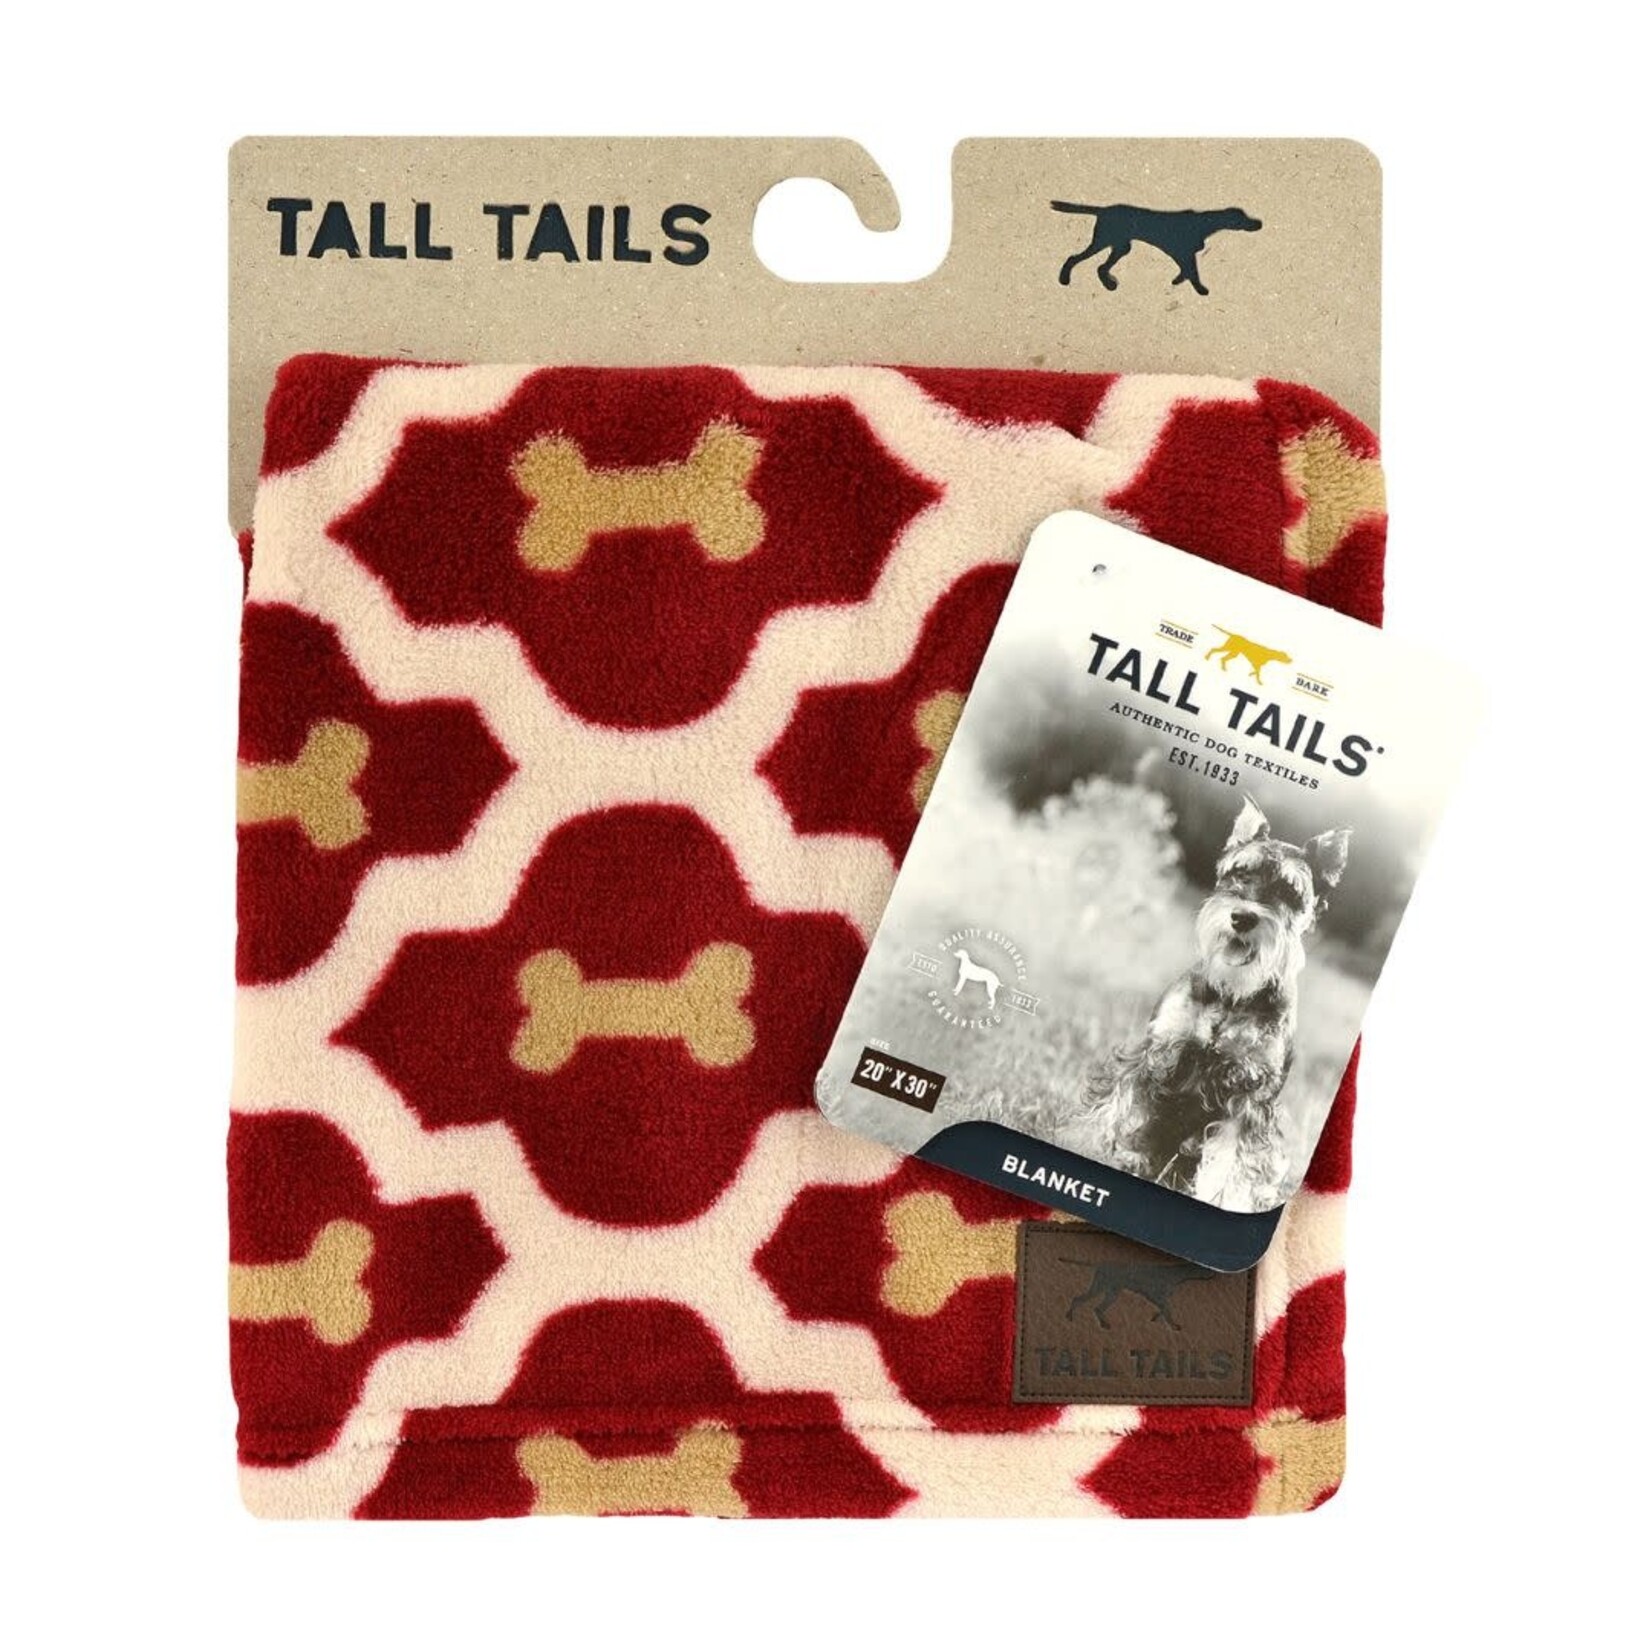 Tall Tails Tall Tails Red Bone Dog Blanket